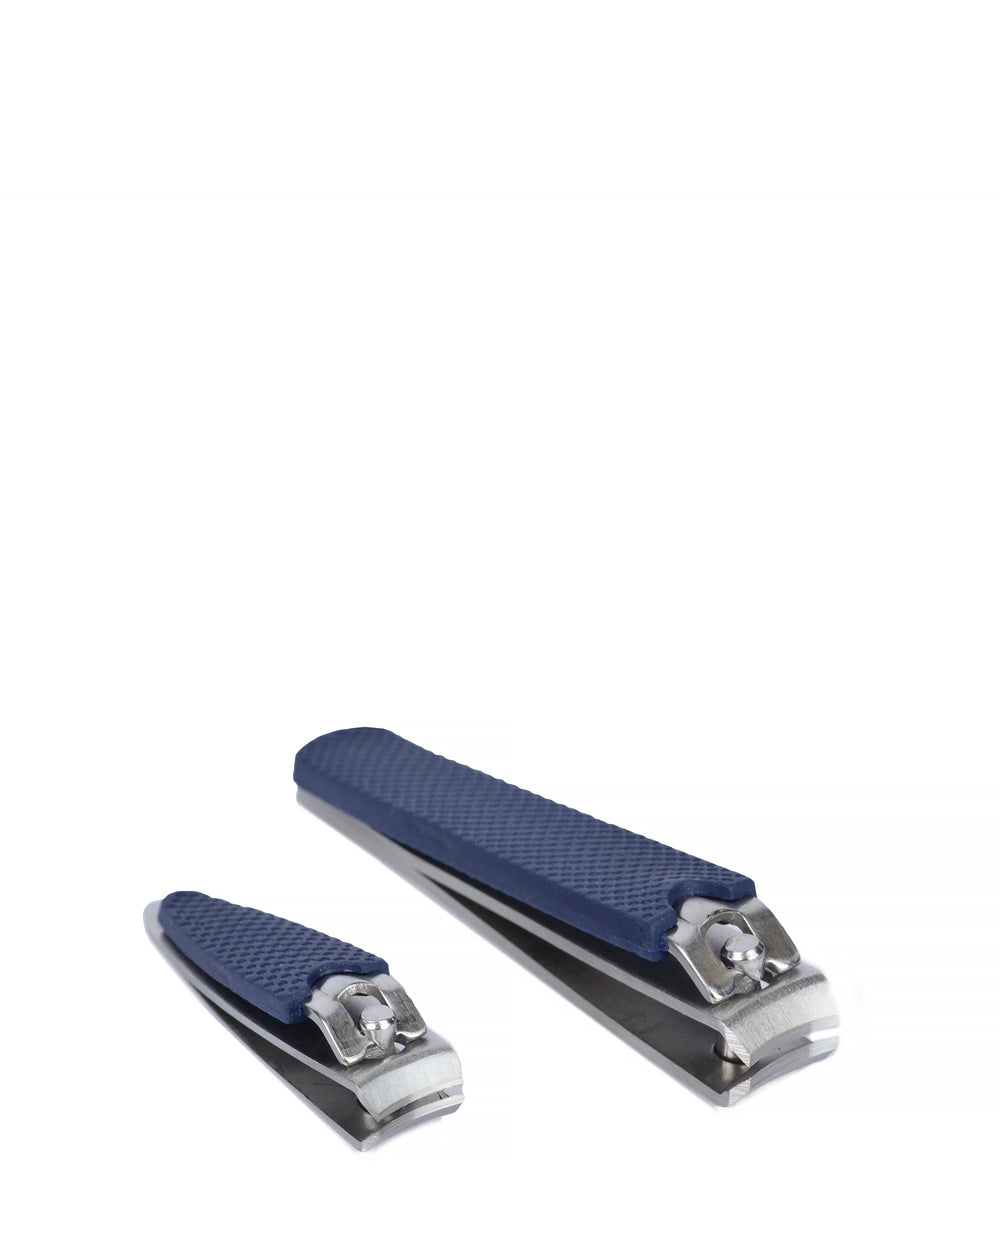 Stainless Large Nail Clipper and Toe Clipper